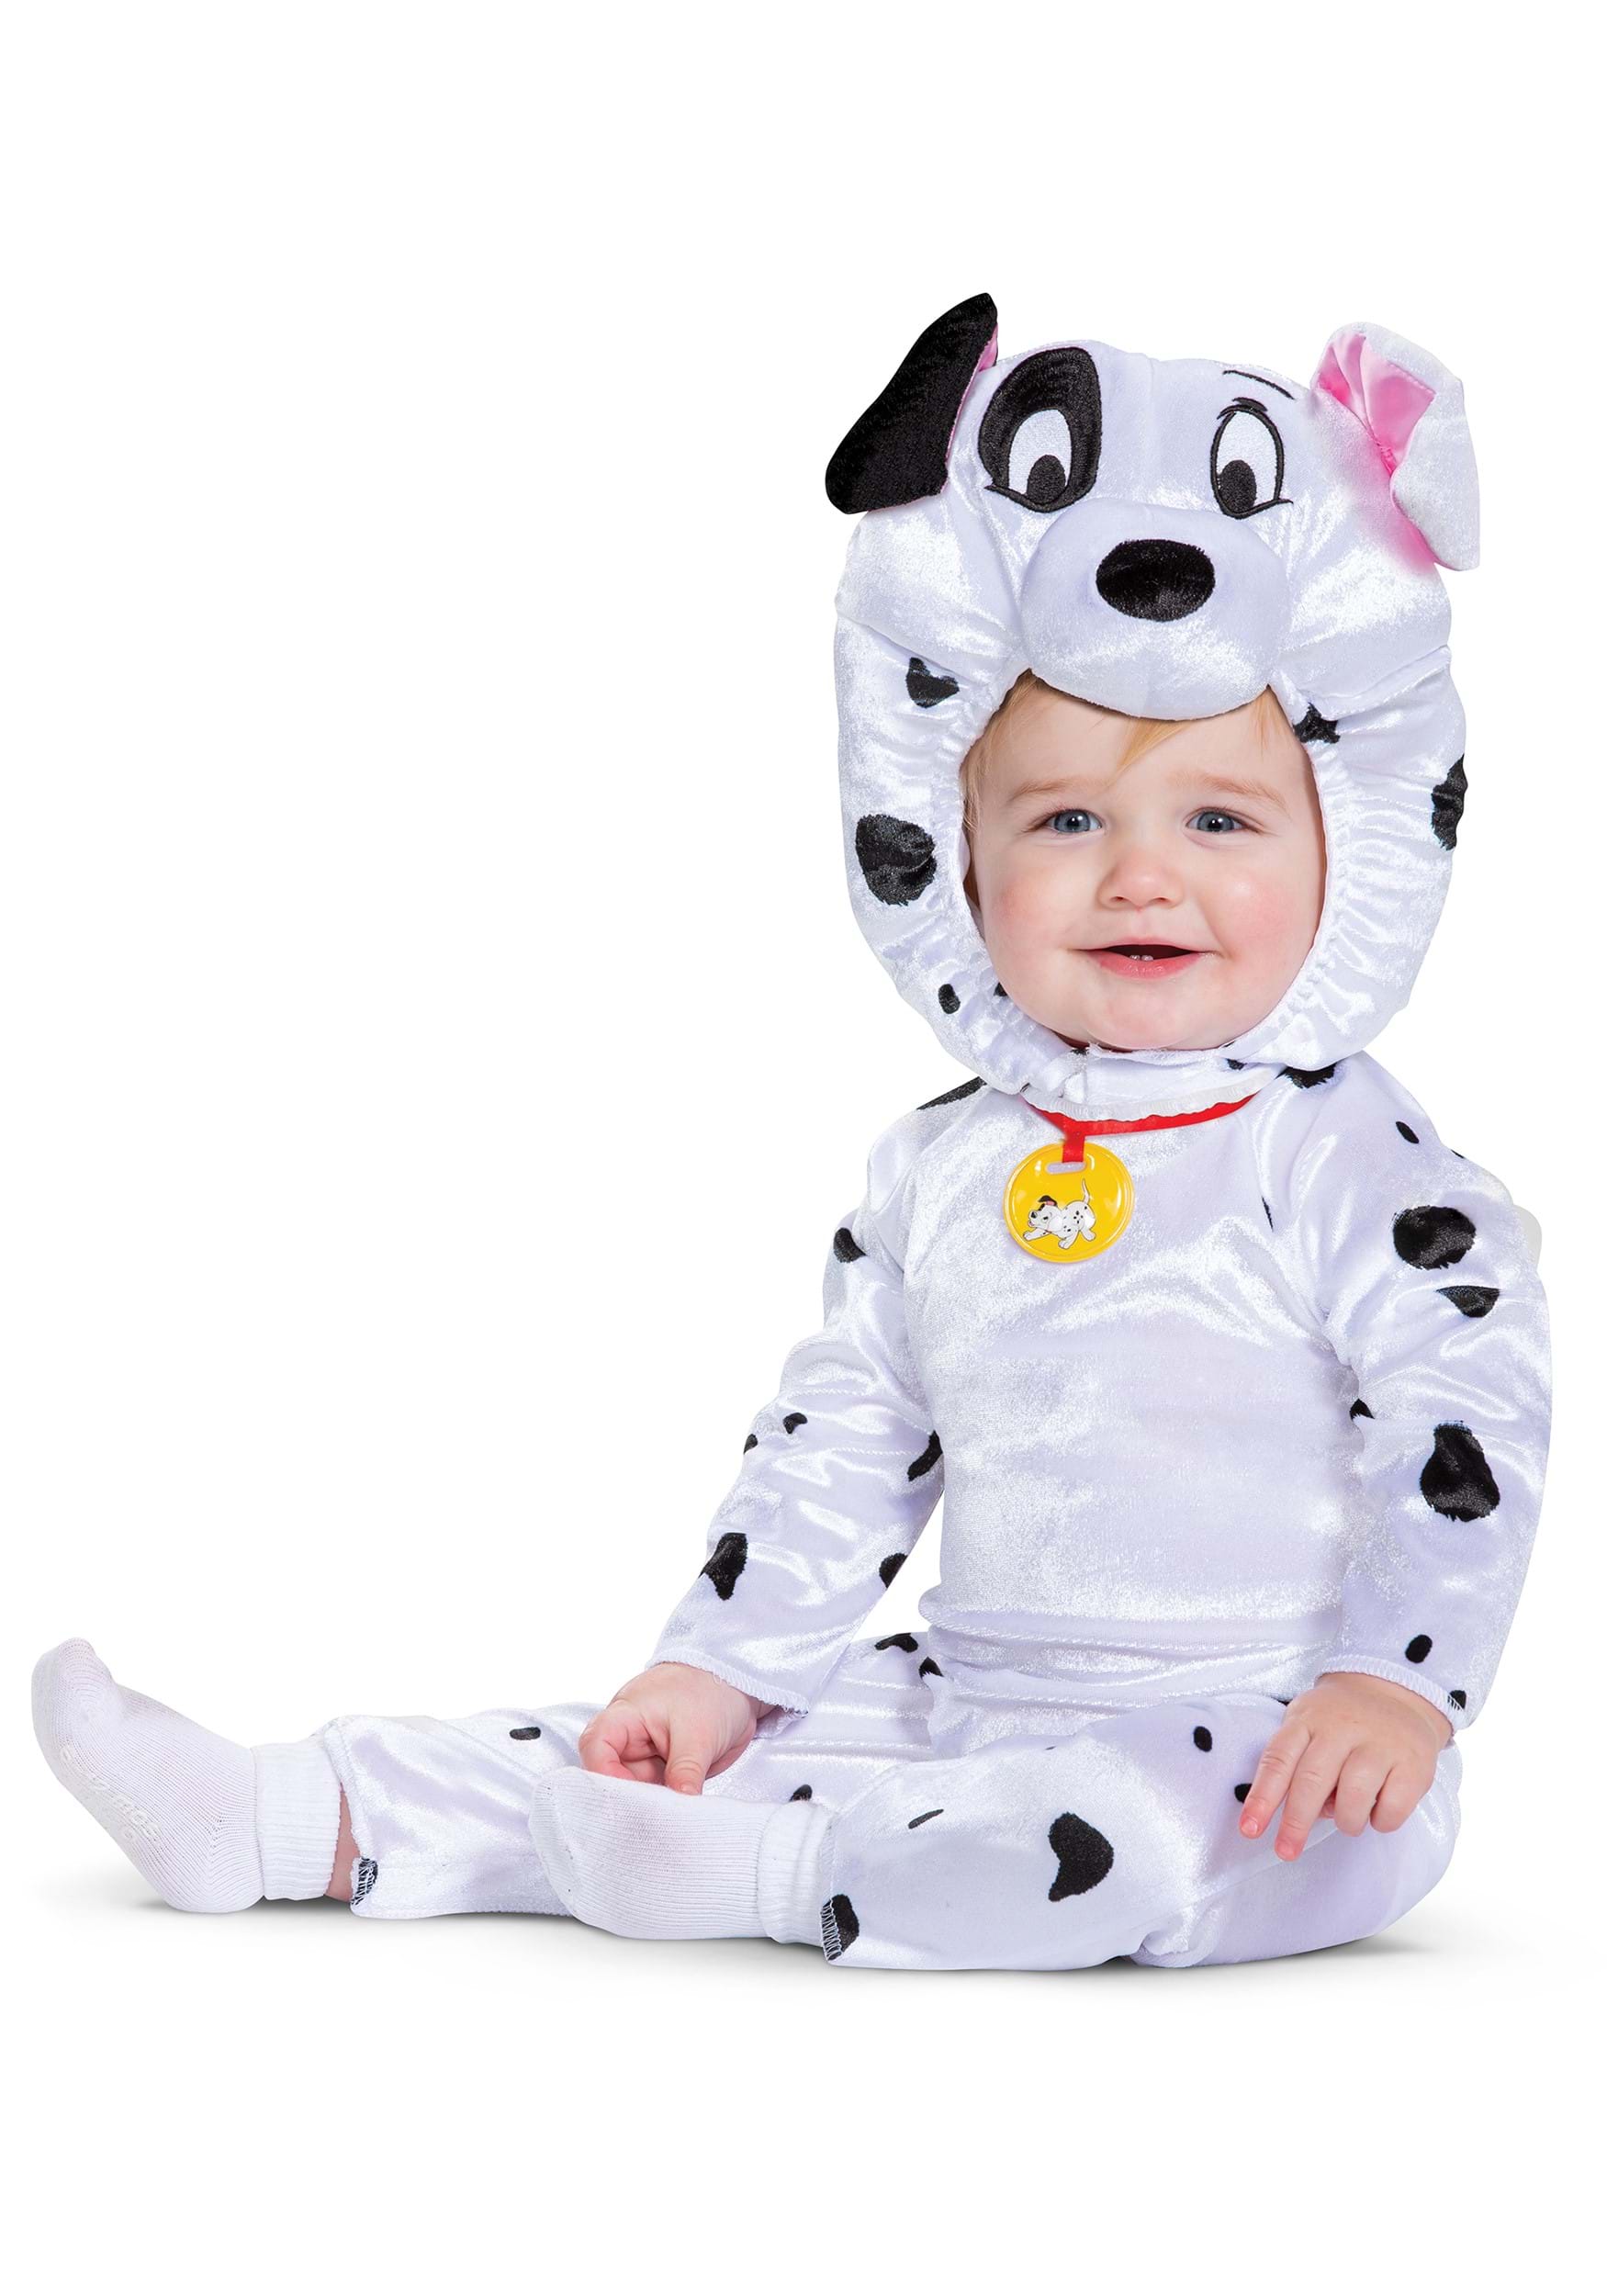 Dalmatian Costume for Toddlers Classic Size Small 2T 101 Dalmatians 